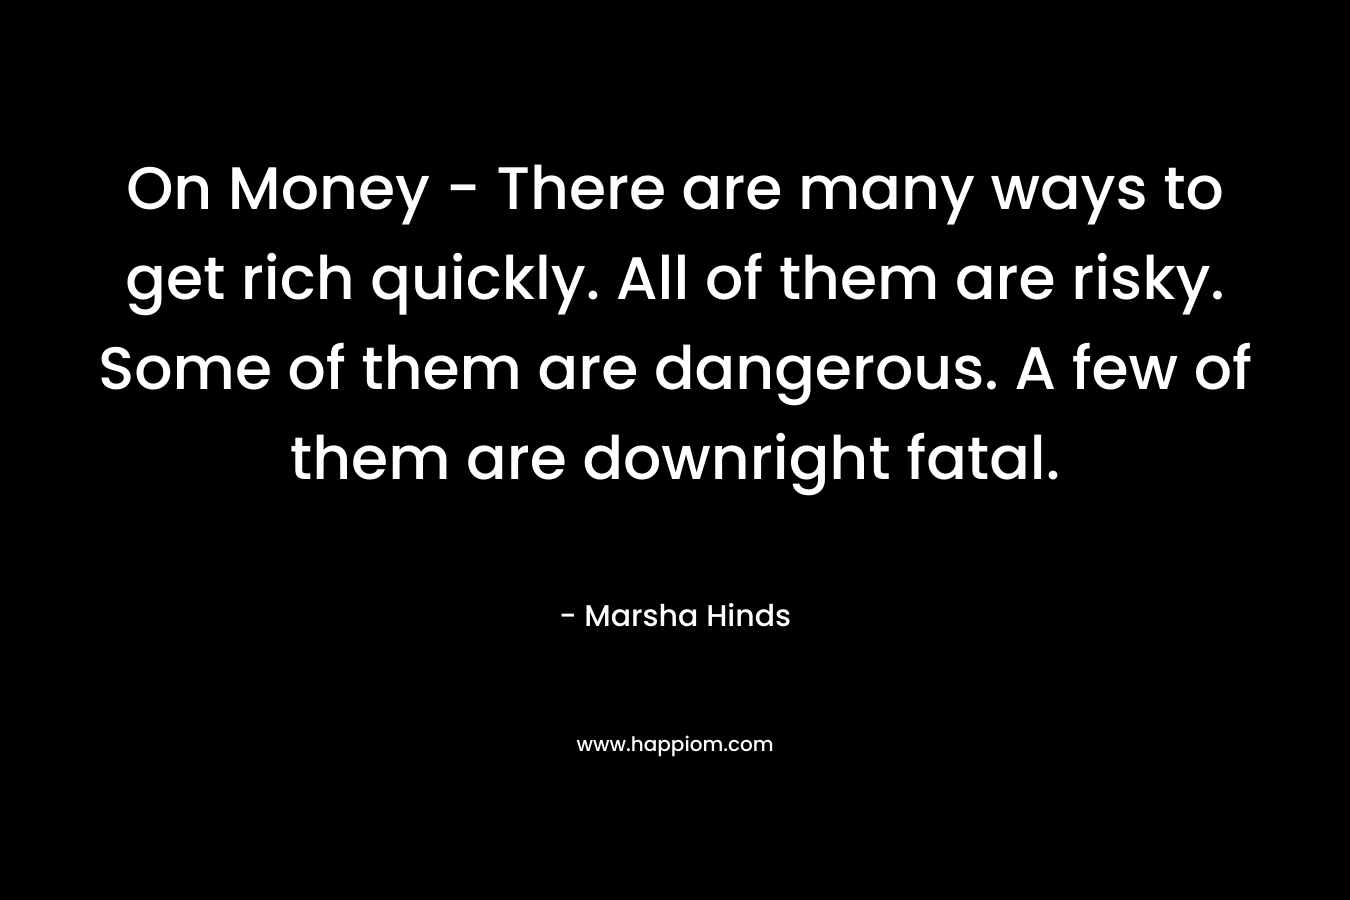 On Money - There are many ways to get rich quickly. All of them are risky. Some of them are dangerous. A few of them are downright fatal.